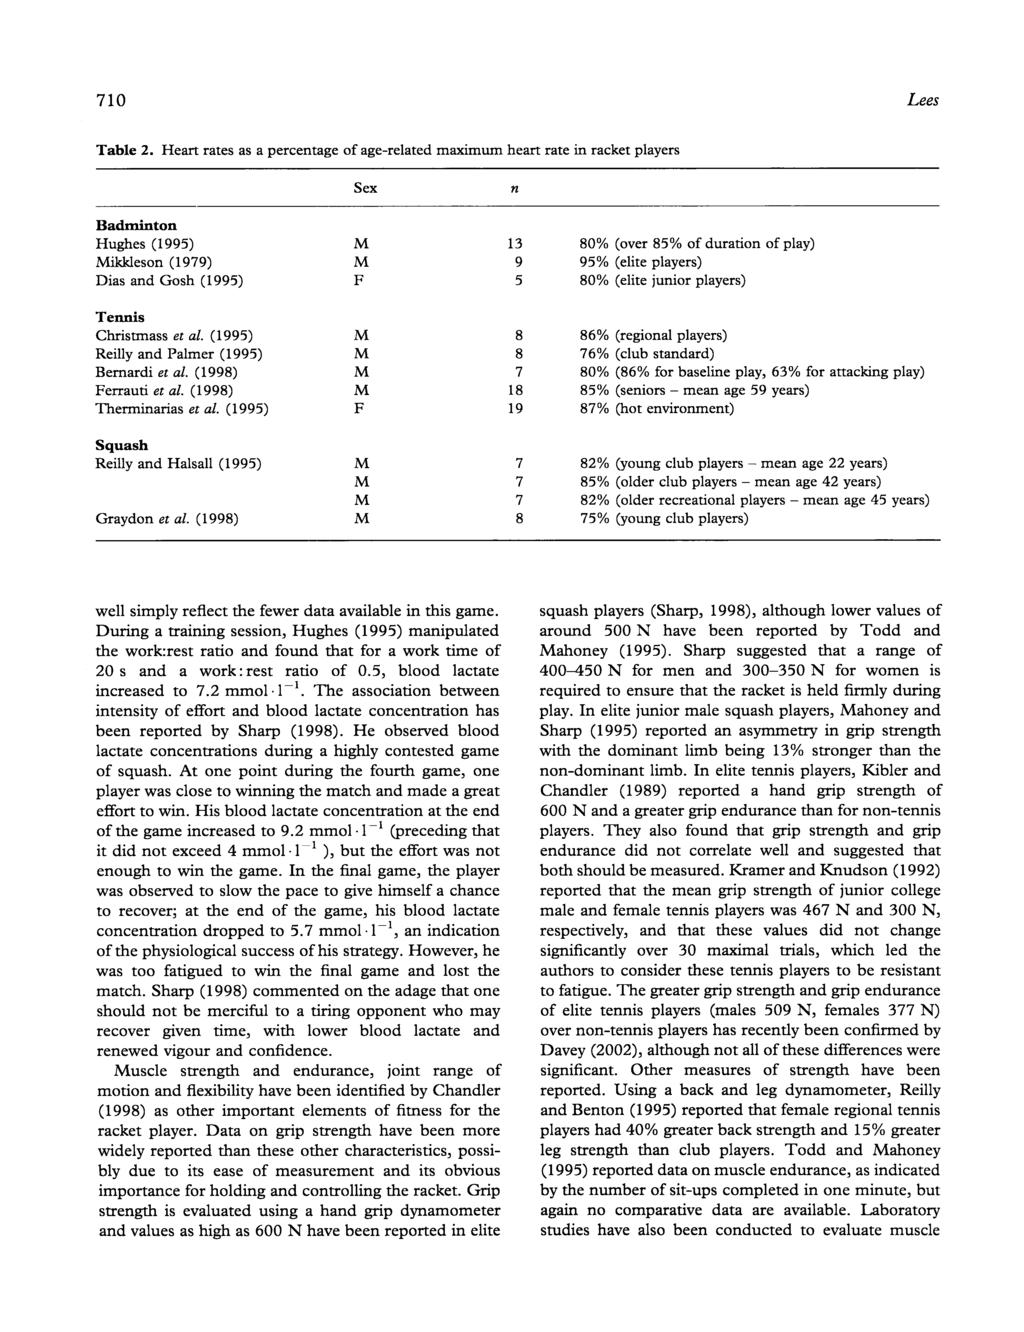 Lees Table 2. Heart rates as a percentage of age-related maximum heart rate in racket players Sex n Badminton Hughes (1 995) Mikkleson (1979) Dias and Gosh (1995) Tennis Chrisunass et al.